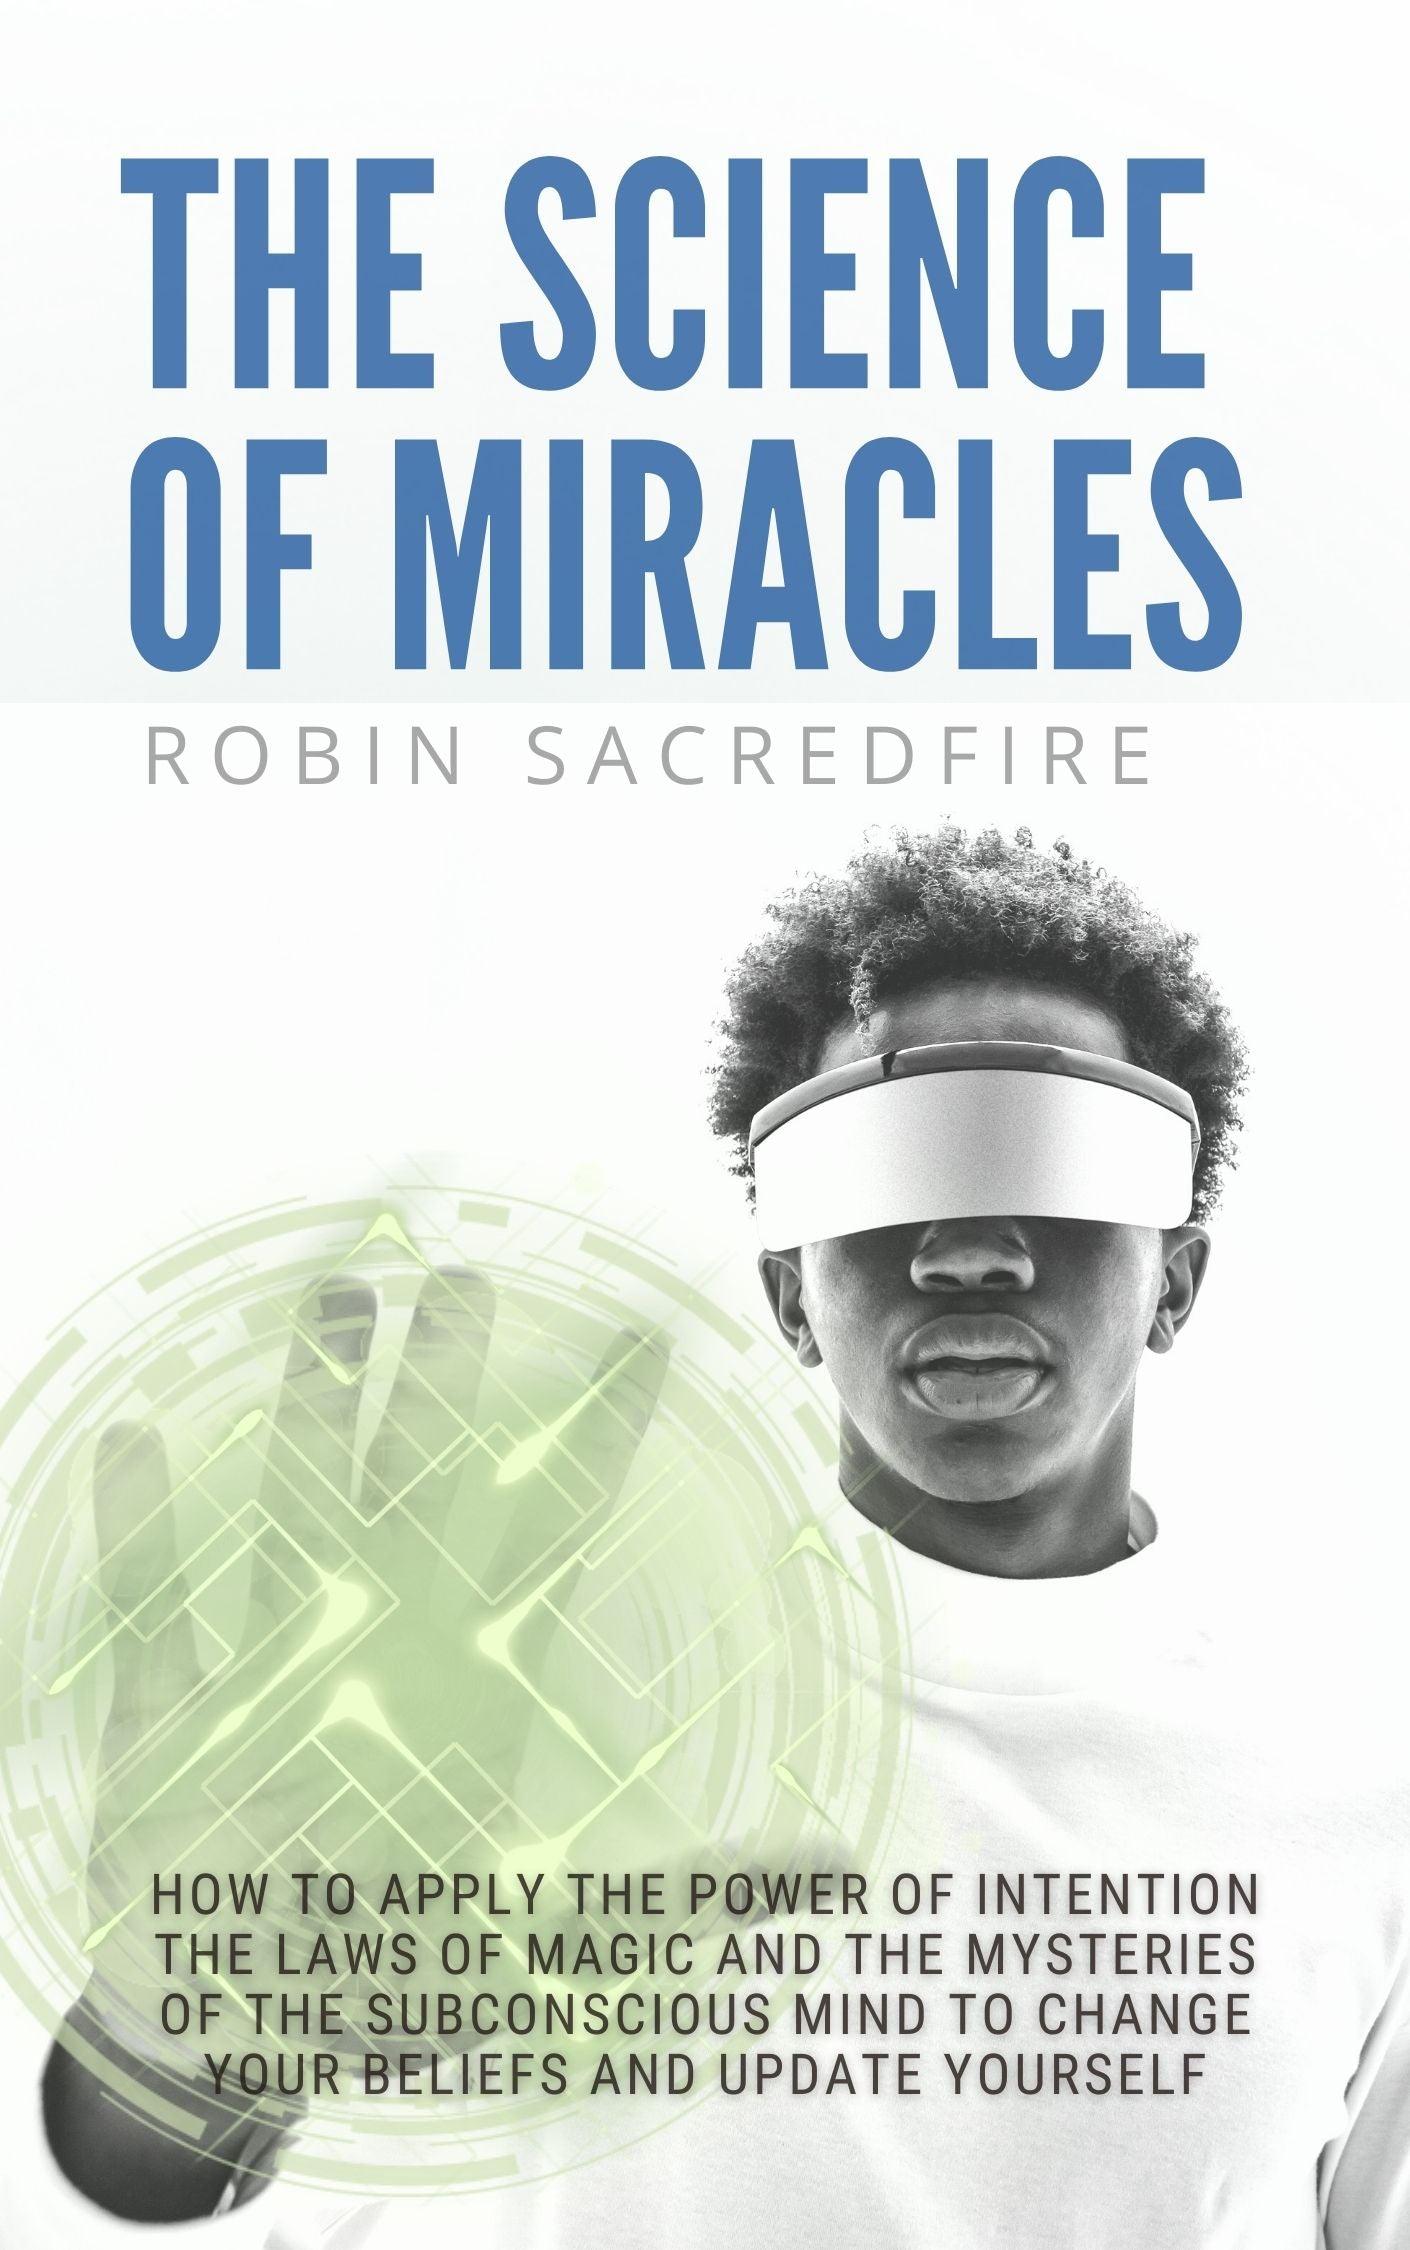 The Science of Miracles - 22 Lions